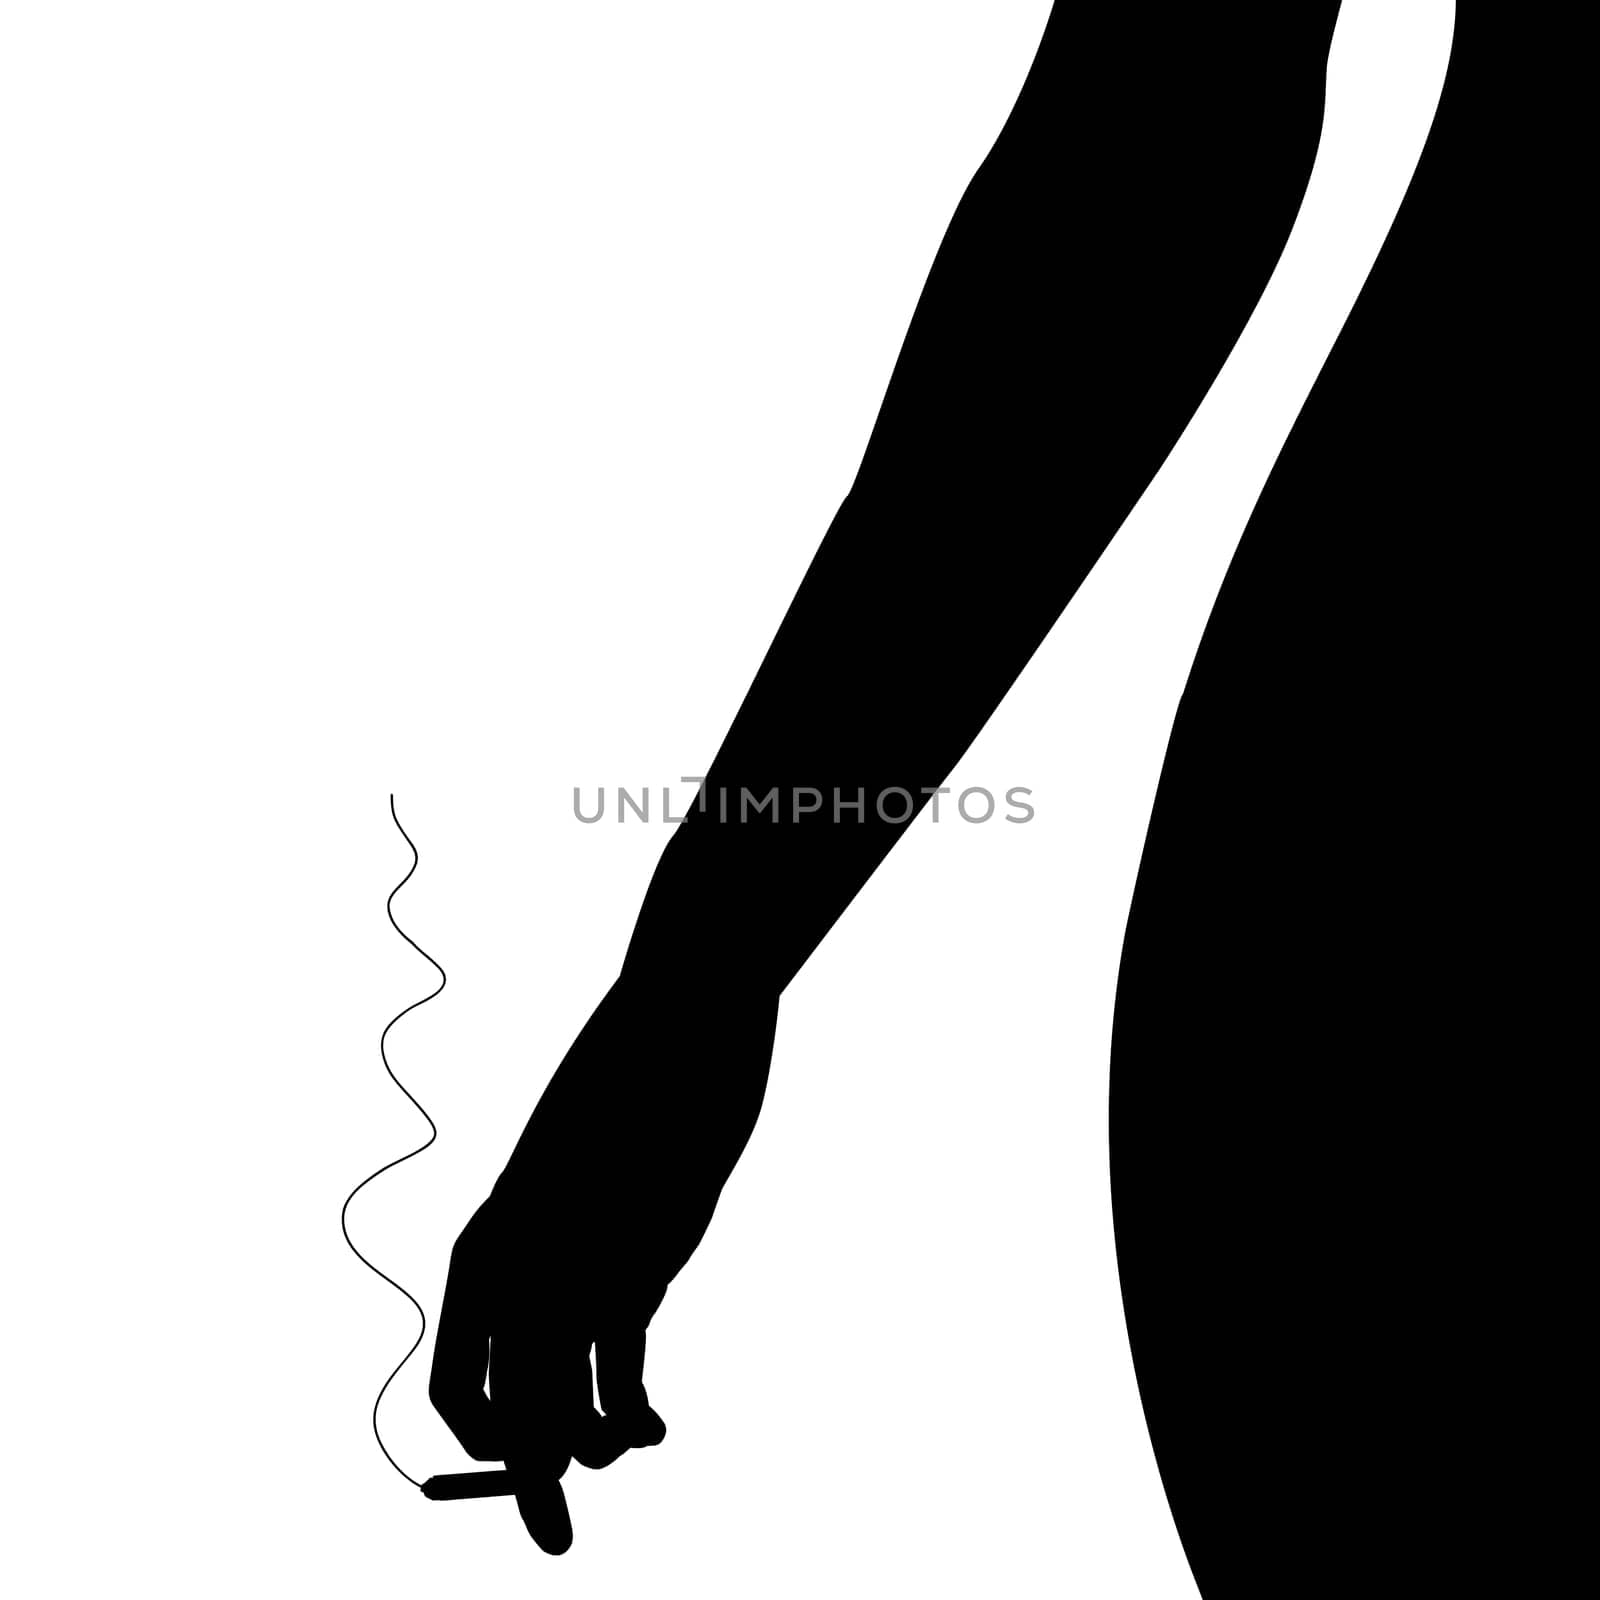 Silhouette of a woman's body with a cigarette in her hand